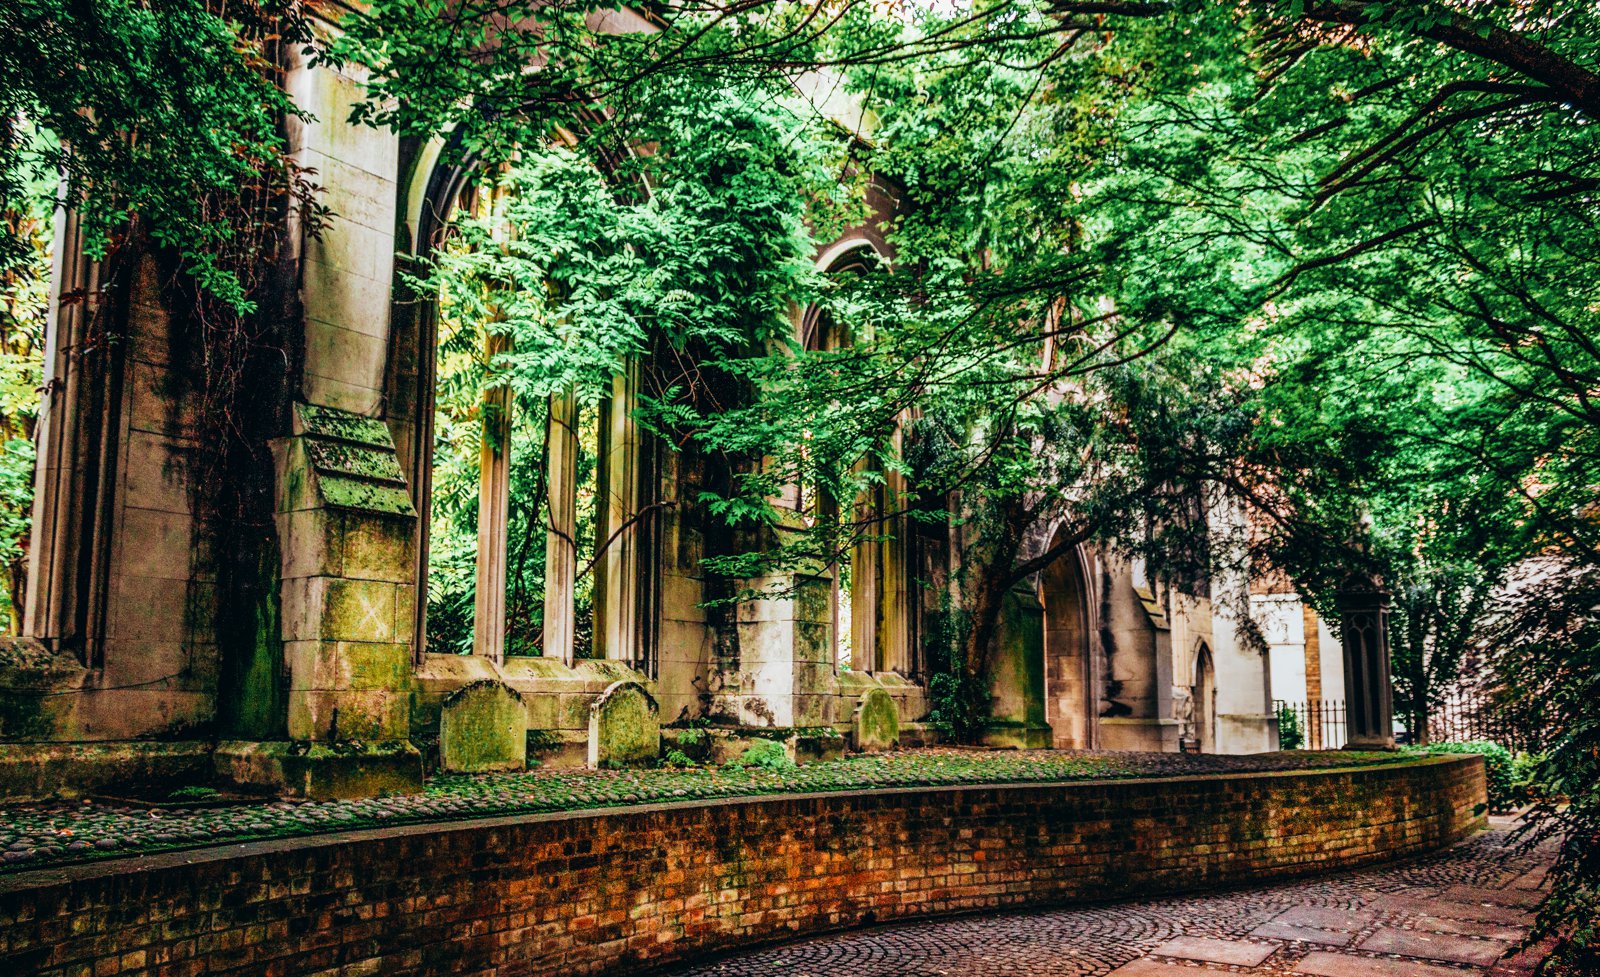 15 Amazing Secret Spots You Have To See In London! - Hand Luggage Only